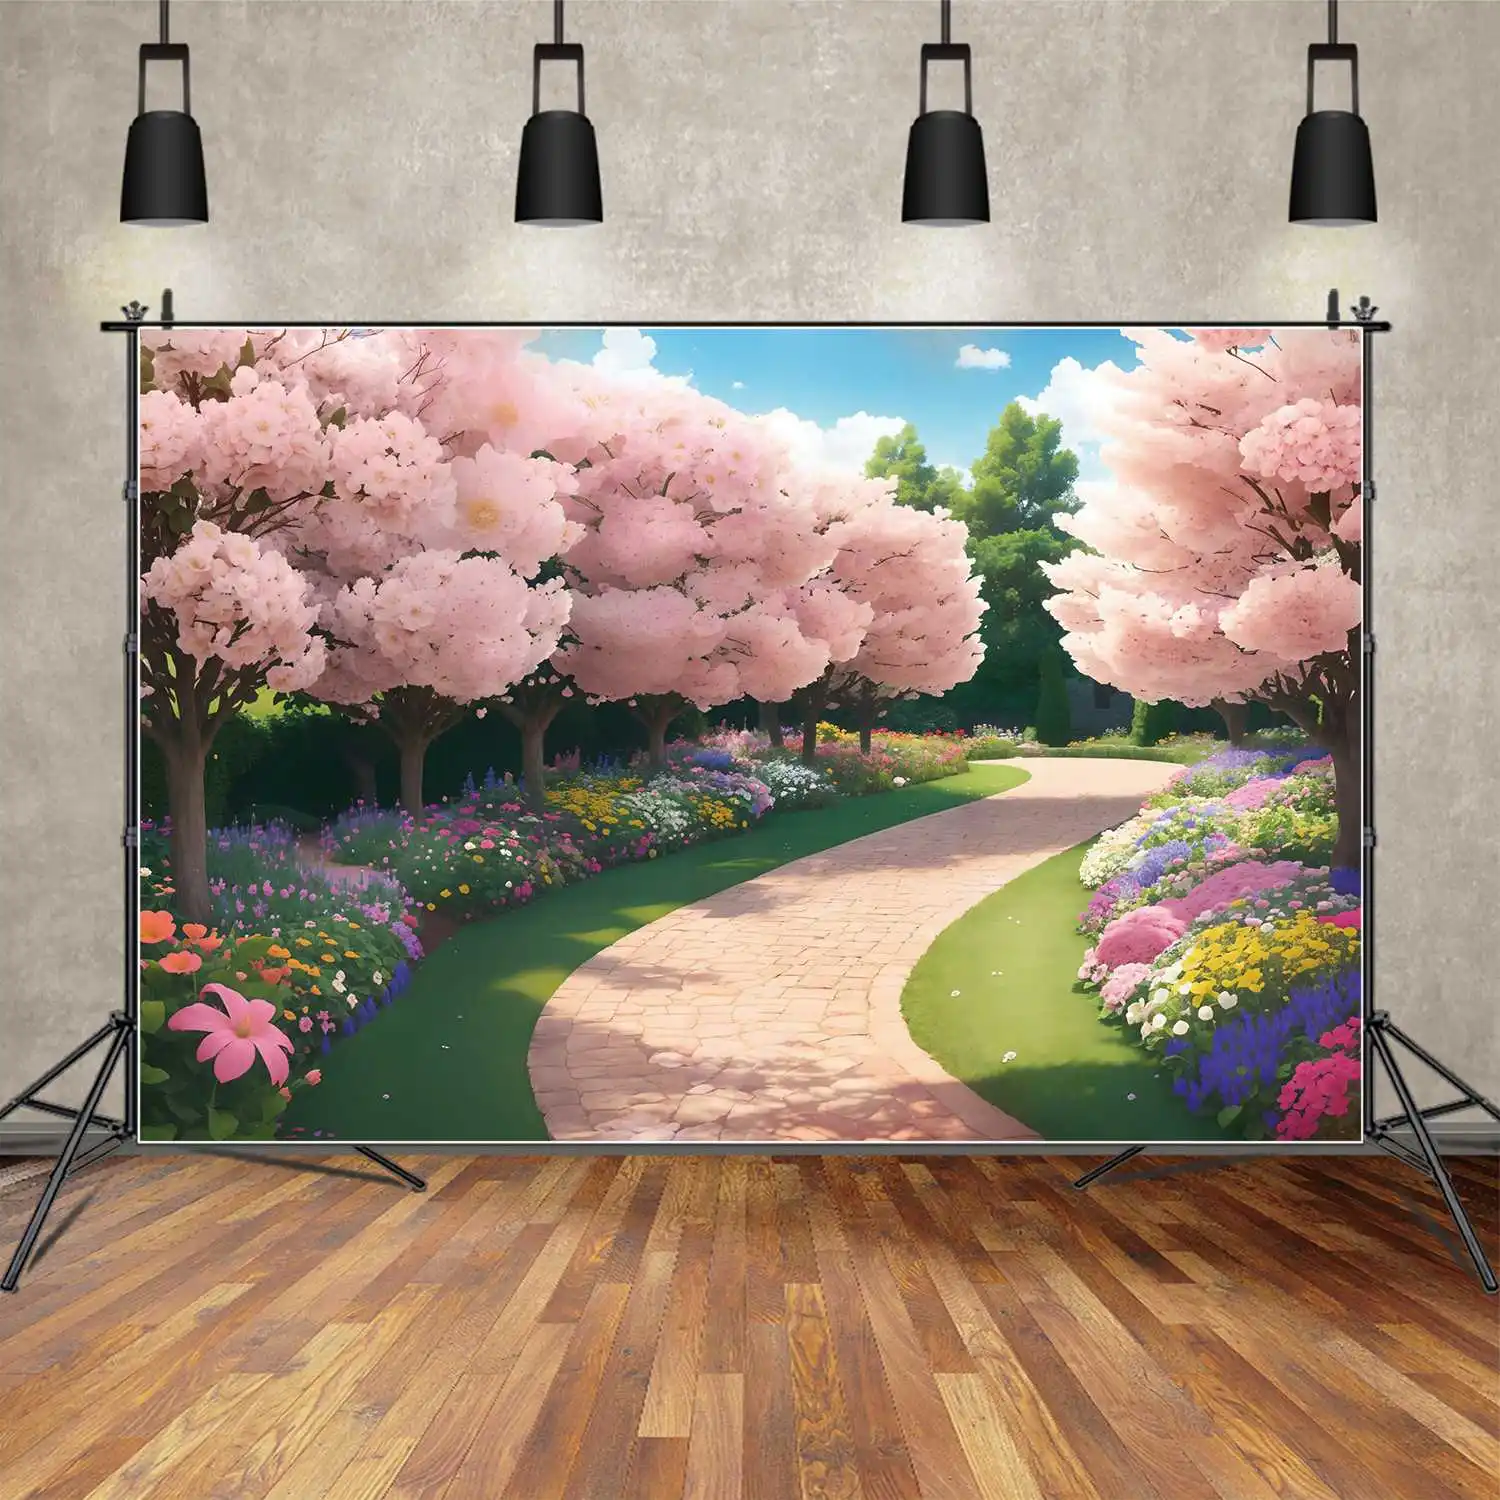 

Garden Floral Road Photography Backdrops Decor Pink Blossom Custom Children'S Photobooth Photographic Backgrounds Props